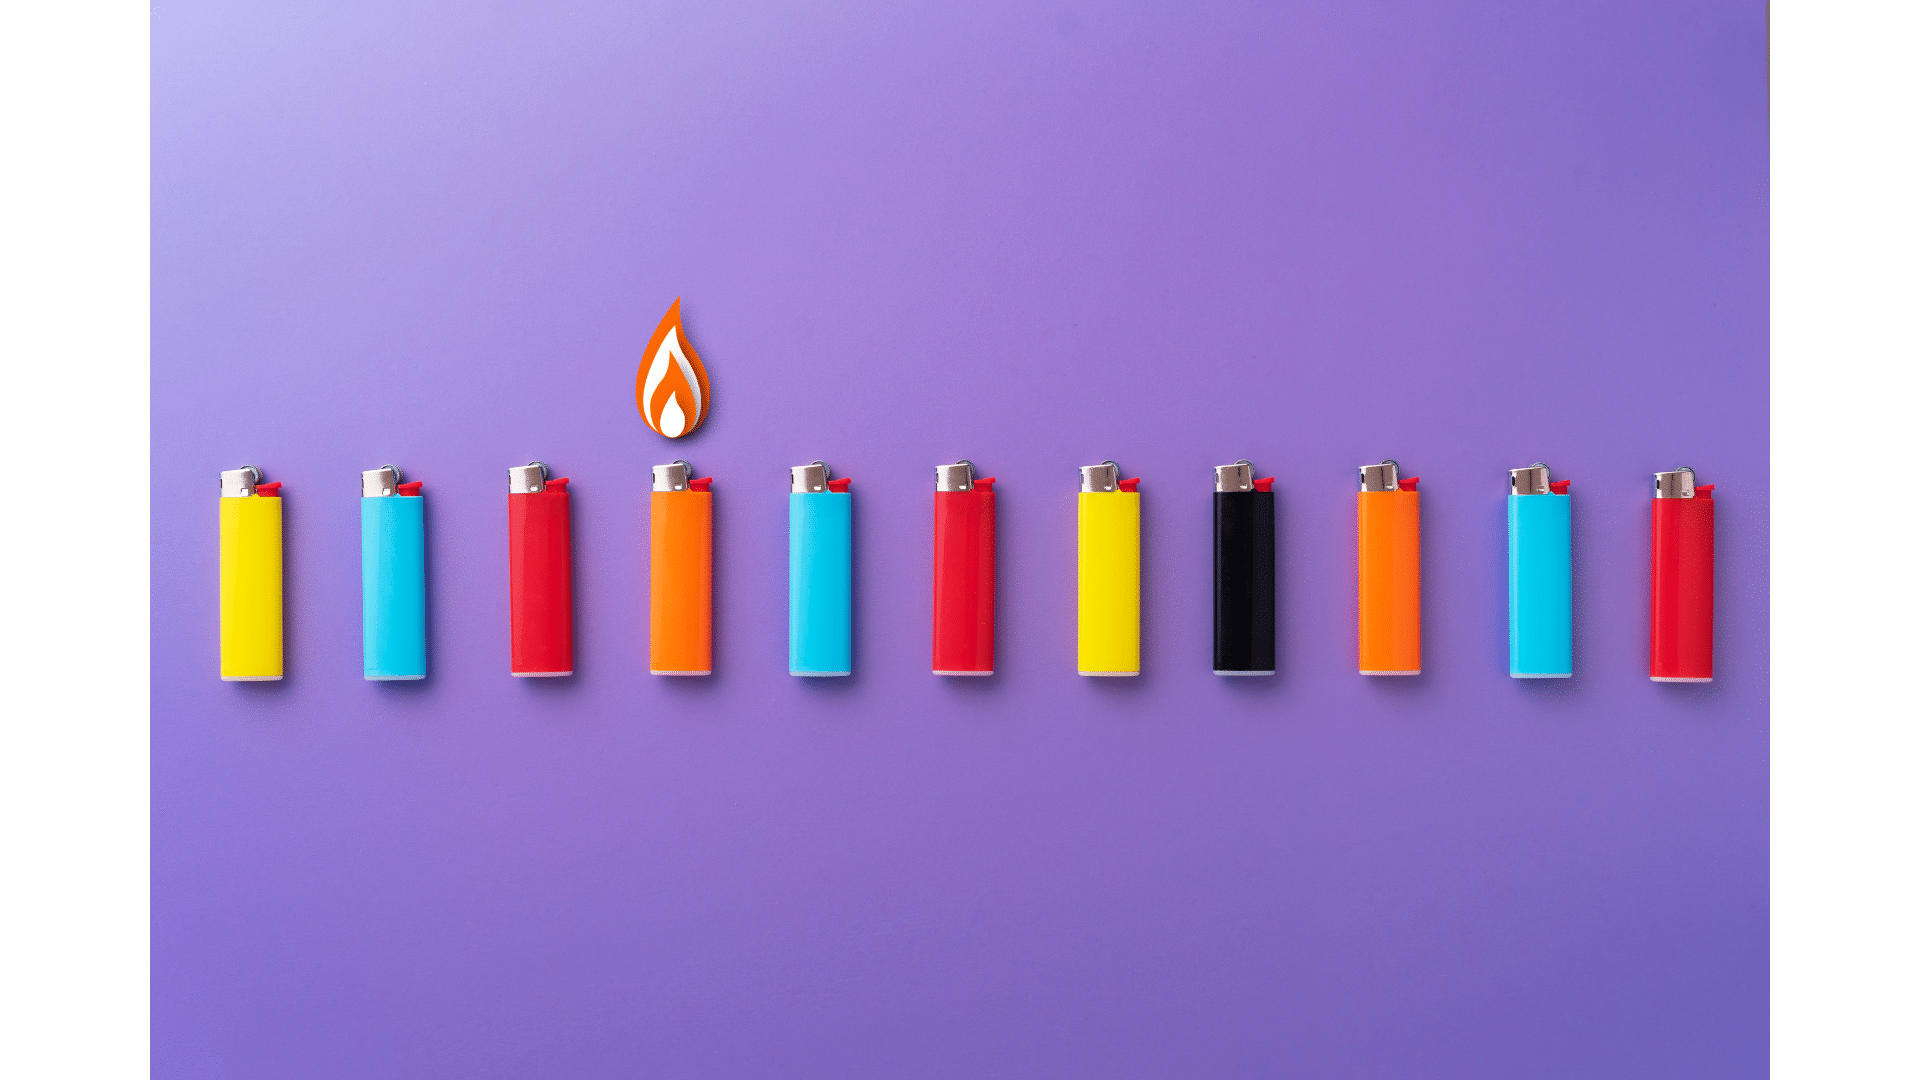 set of colorful bulk lighters on a purple surface.